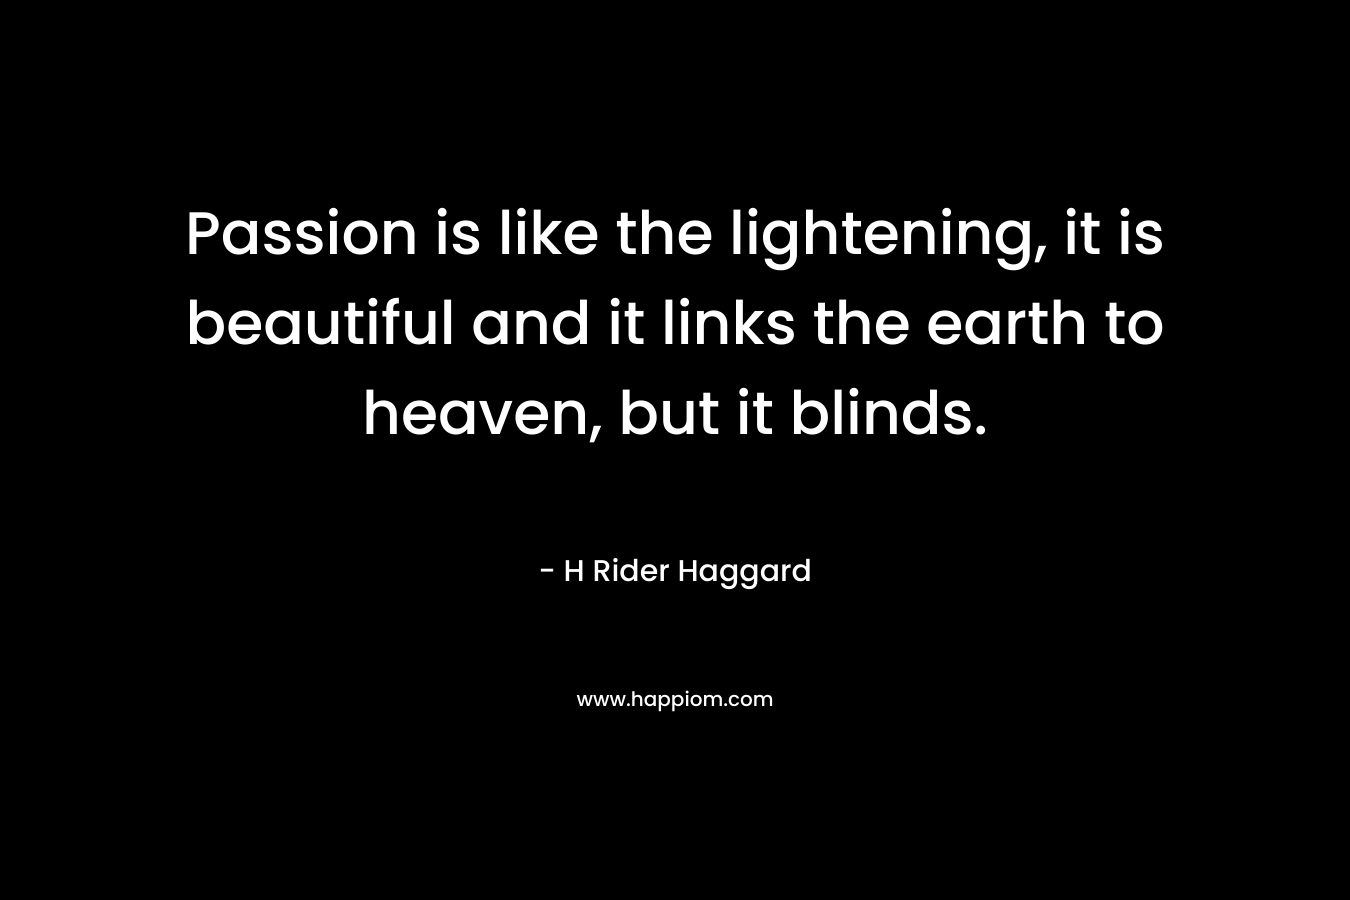 Passion is like the lightening, it is beautiful and it links the earth to heaven, but it blinds. – H Rider Haggard